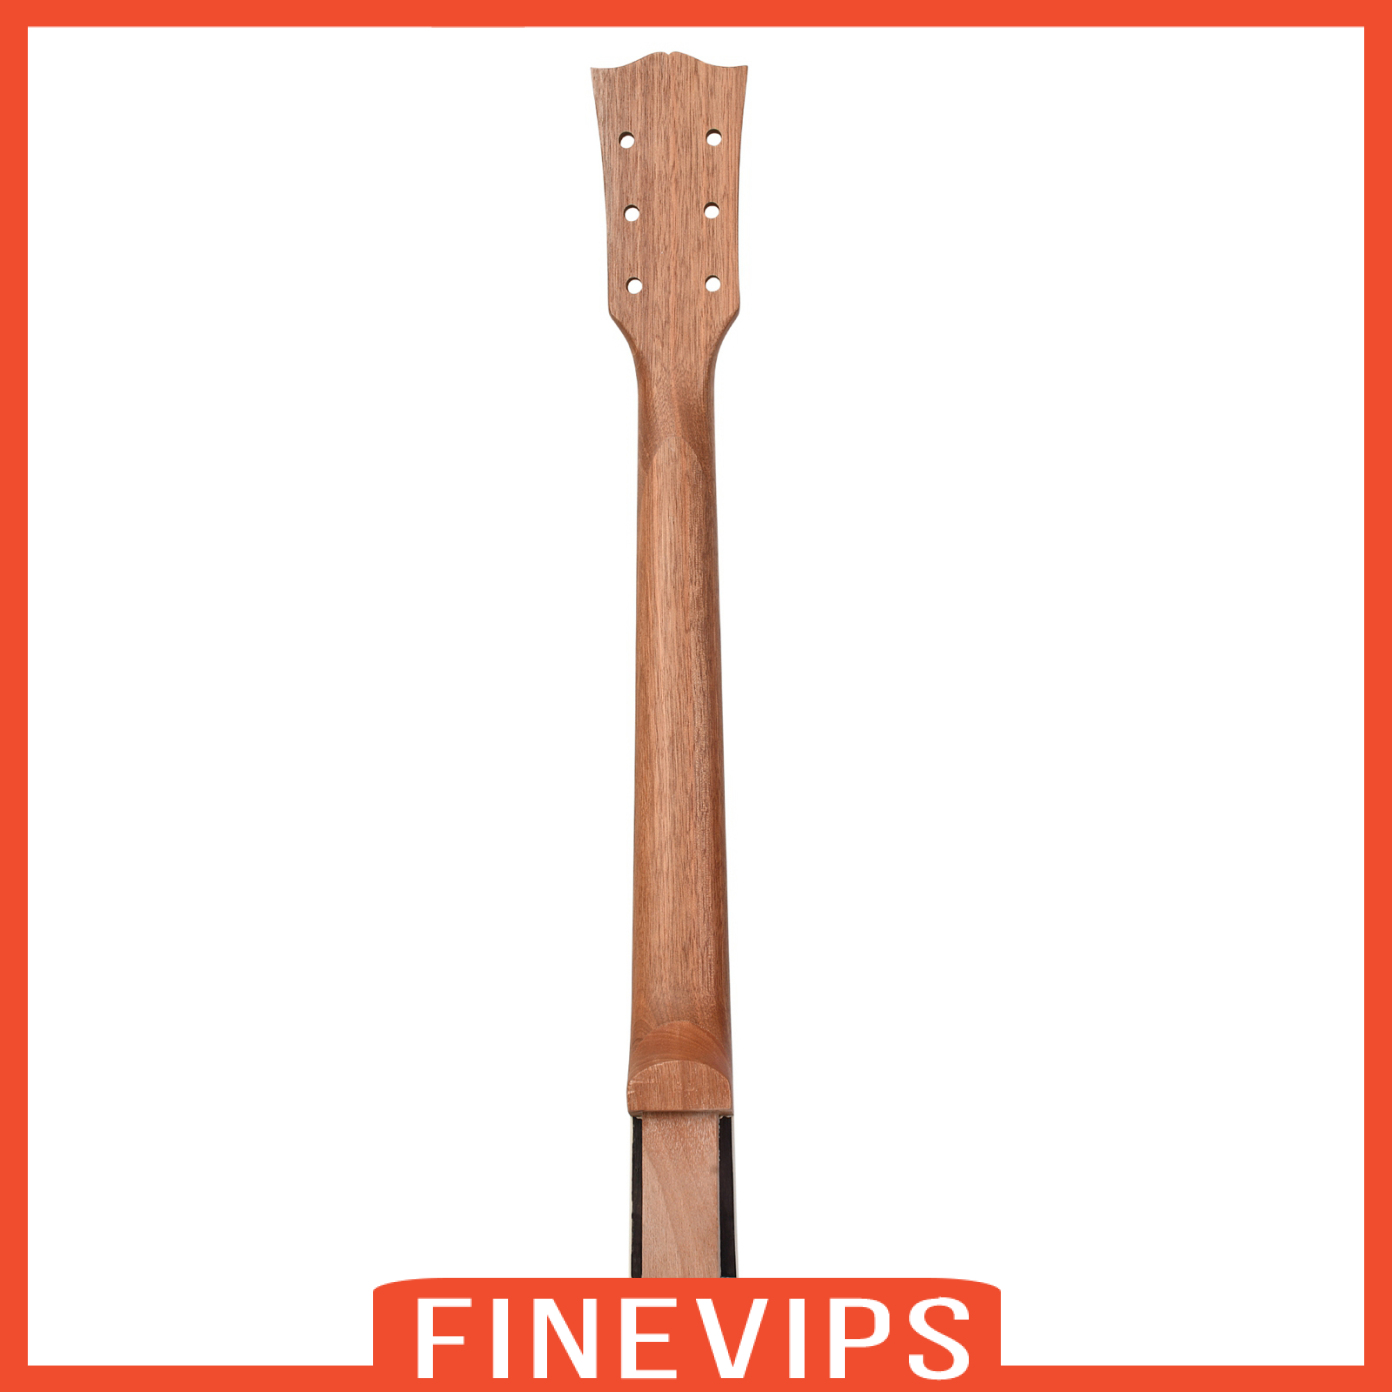 [FINEVIPS]22 Fret Electric Guitar Neck Replacement Maple Wood for LP Guitar Accs